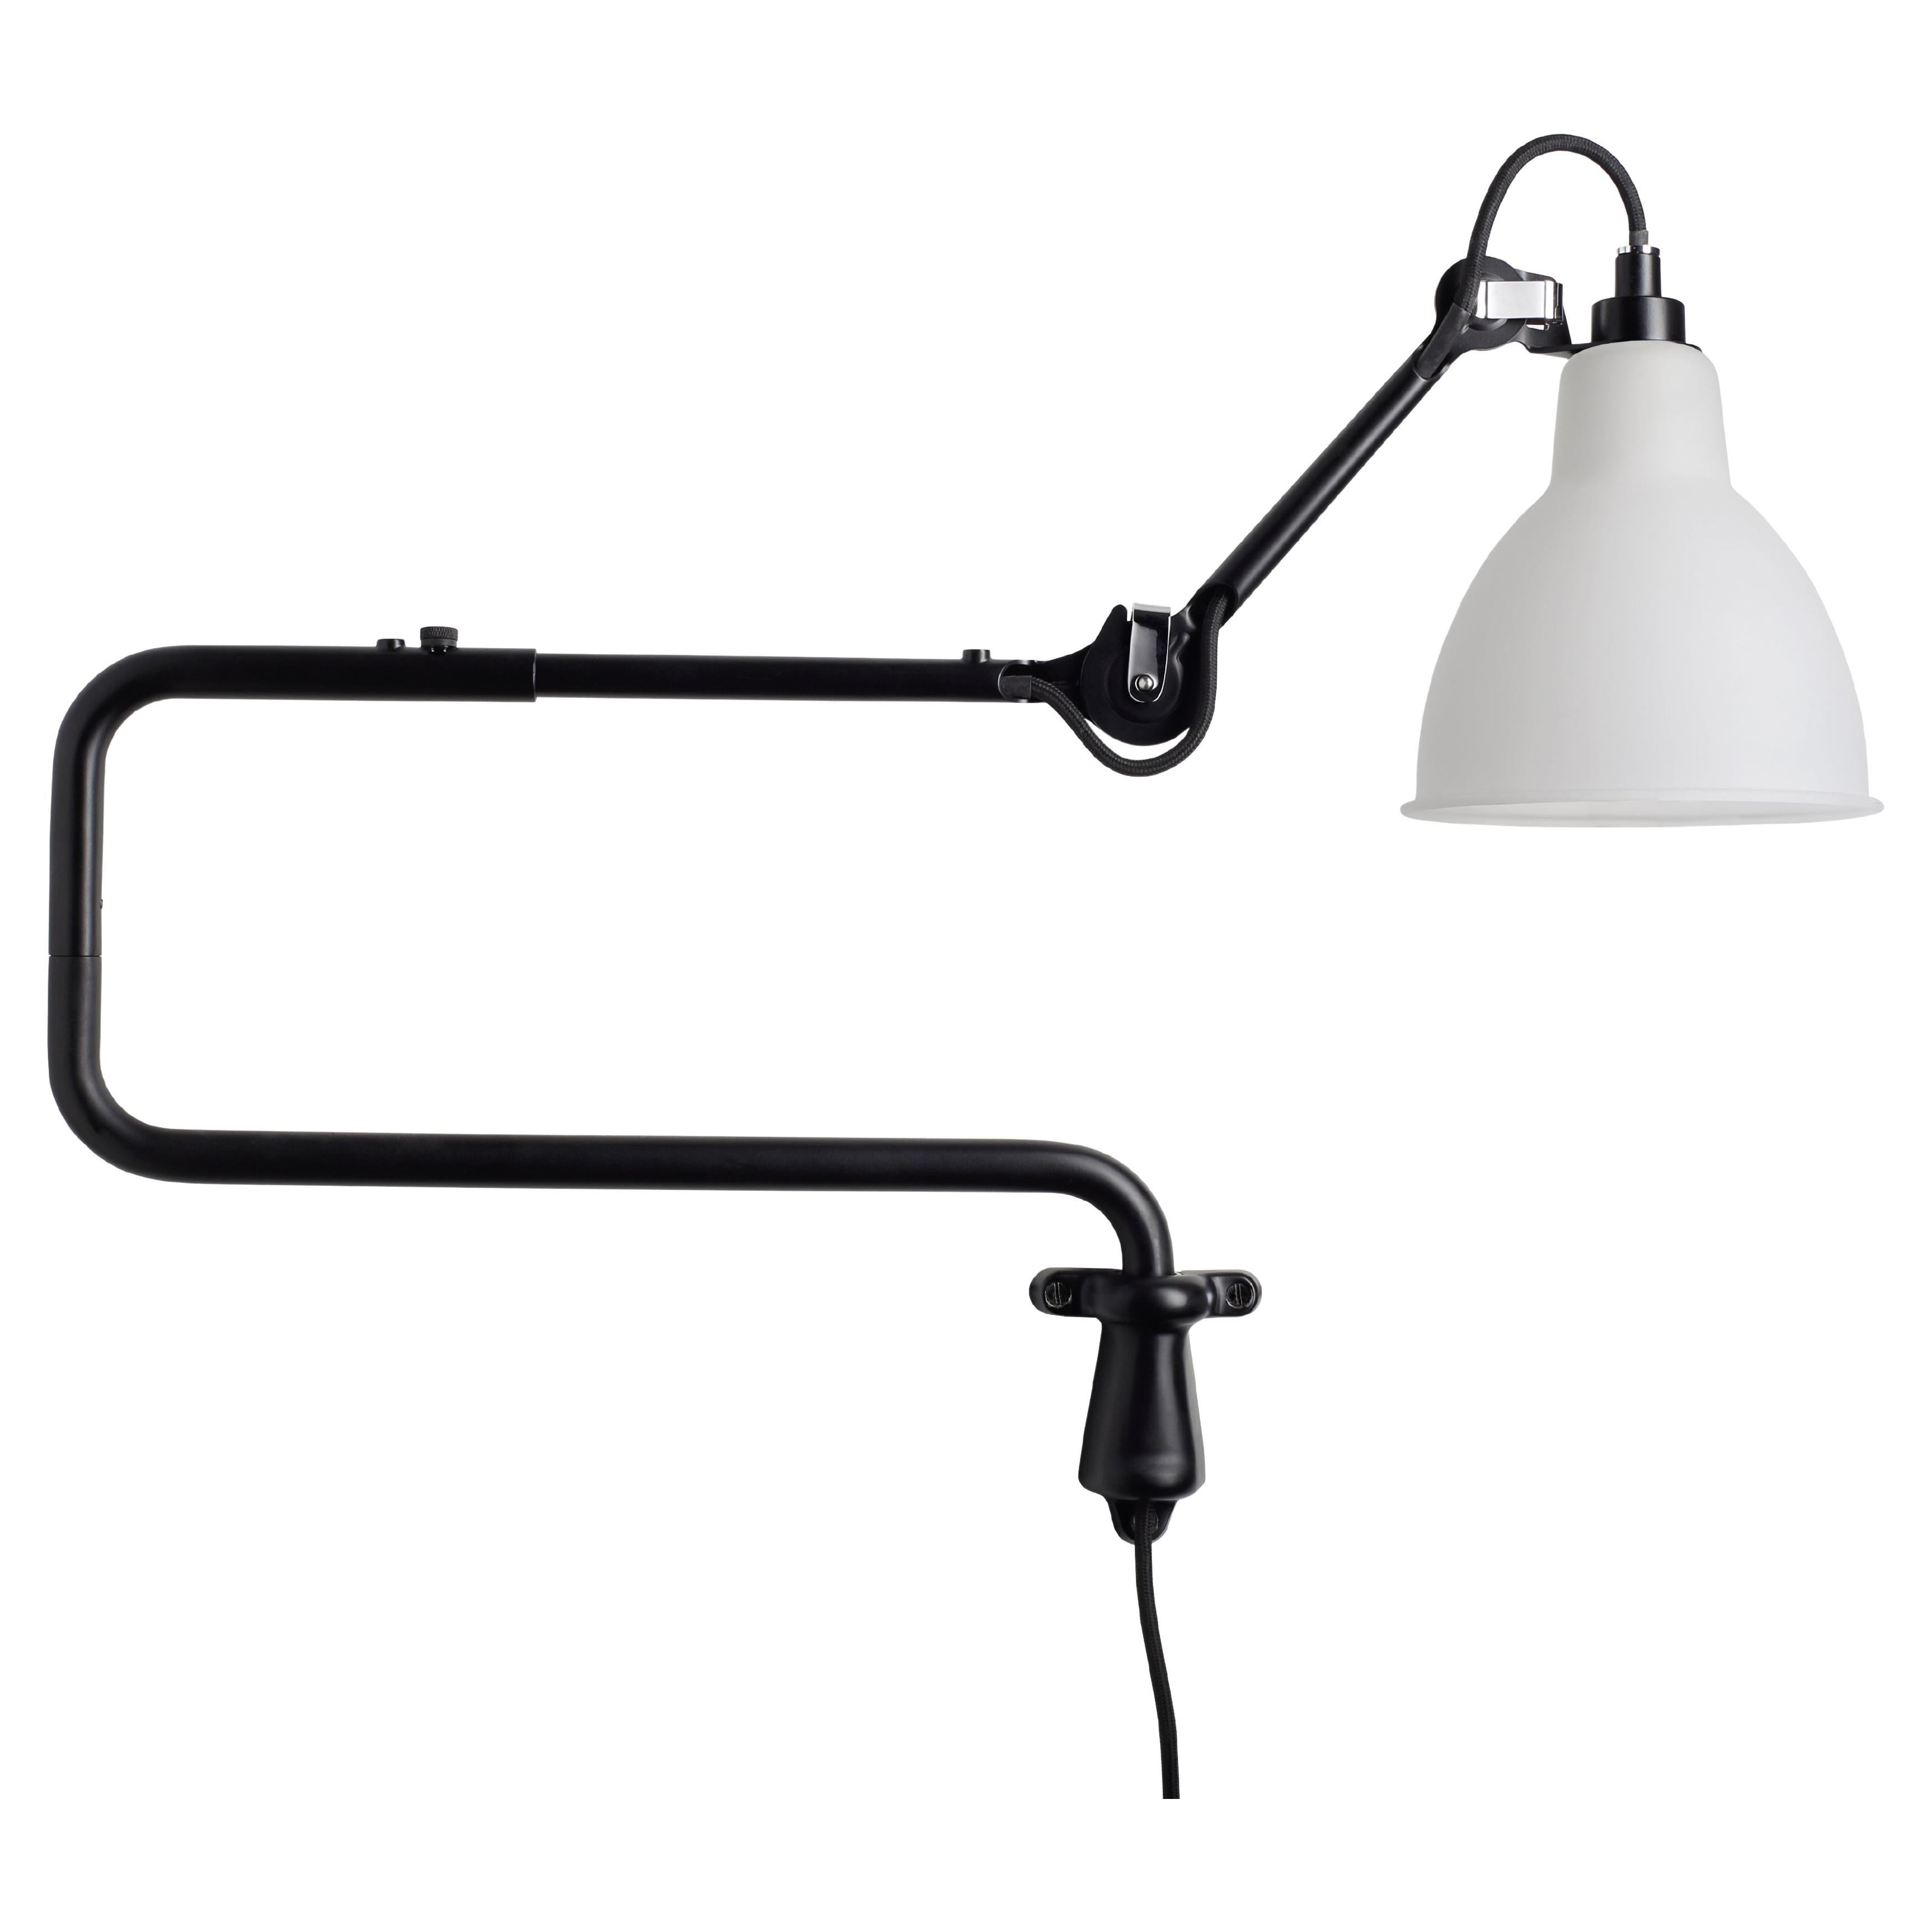 DCW Editions La Lampe Gras N°303 Wall Lamp in Black Arm and Frosted Glass Shade